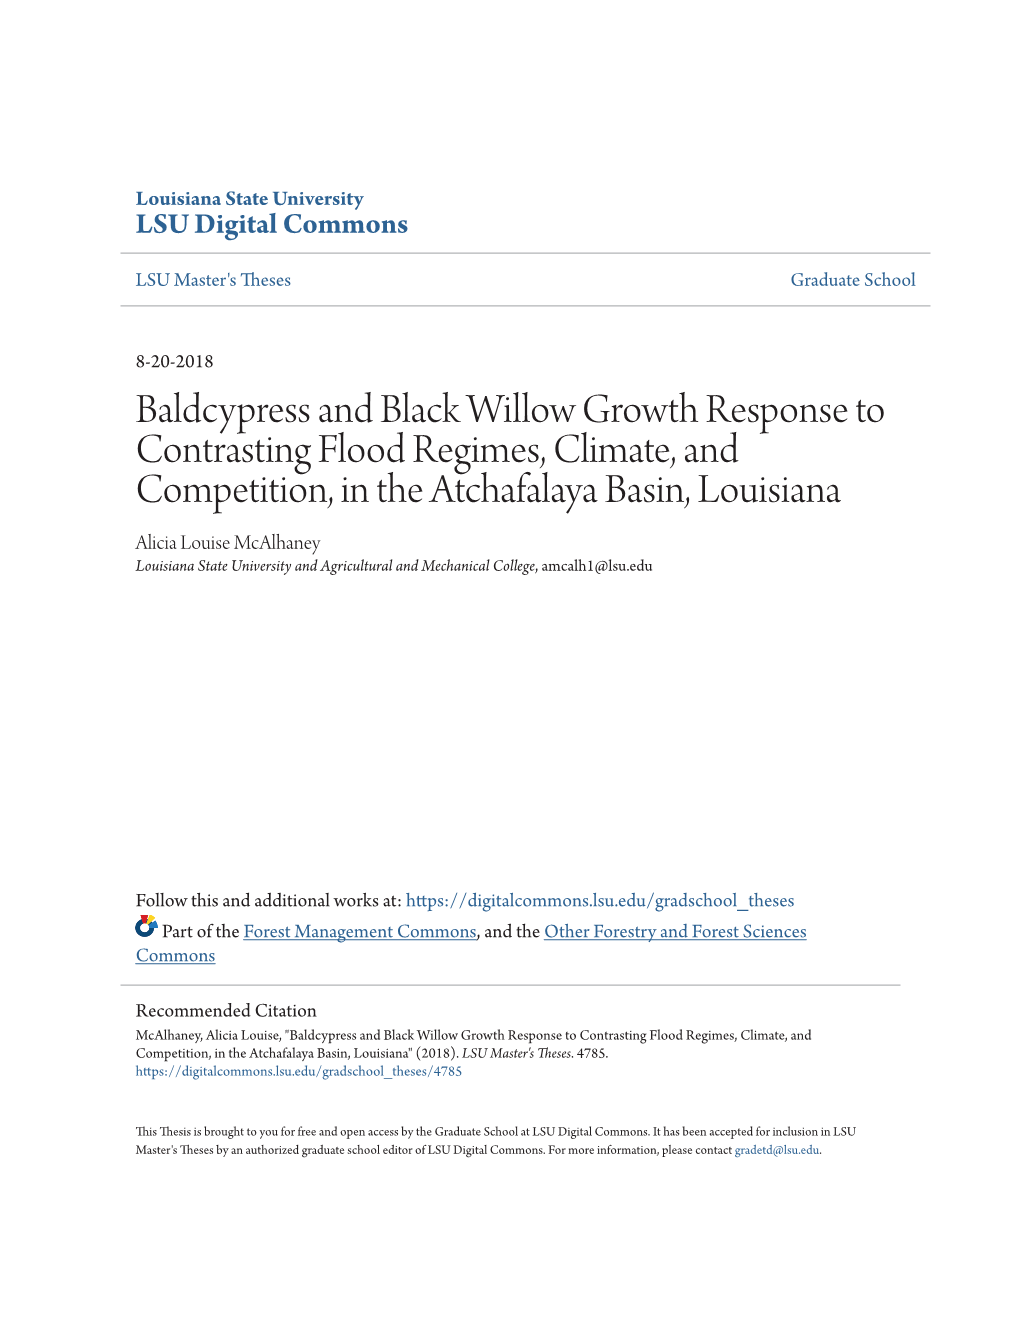 Baldcypress and Black Willow Growth Response to Contrasting Flood Regimes, Climate, and Competition, in the Atchafalaya River Basin, Louisana